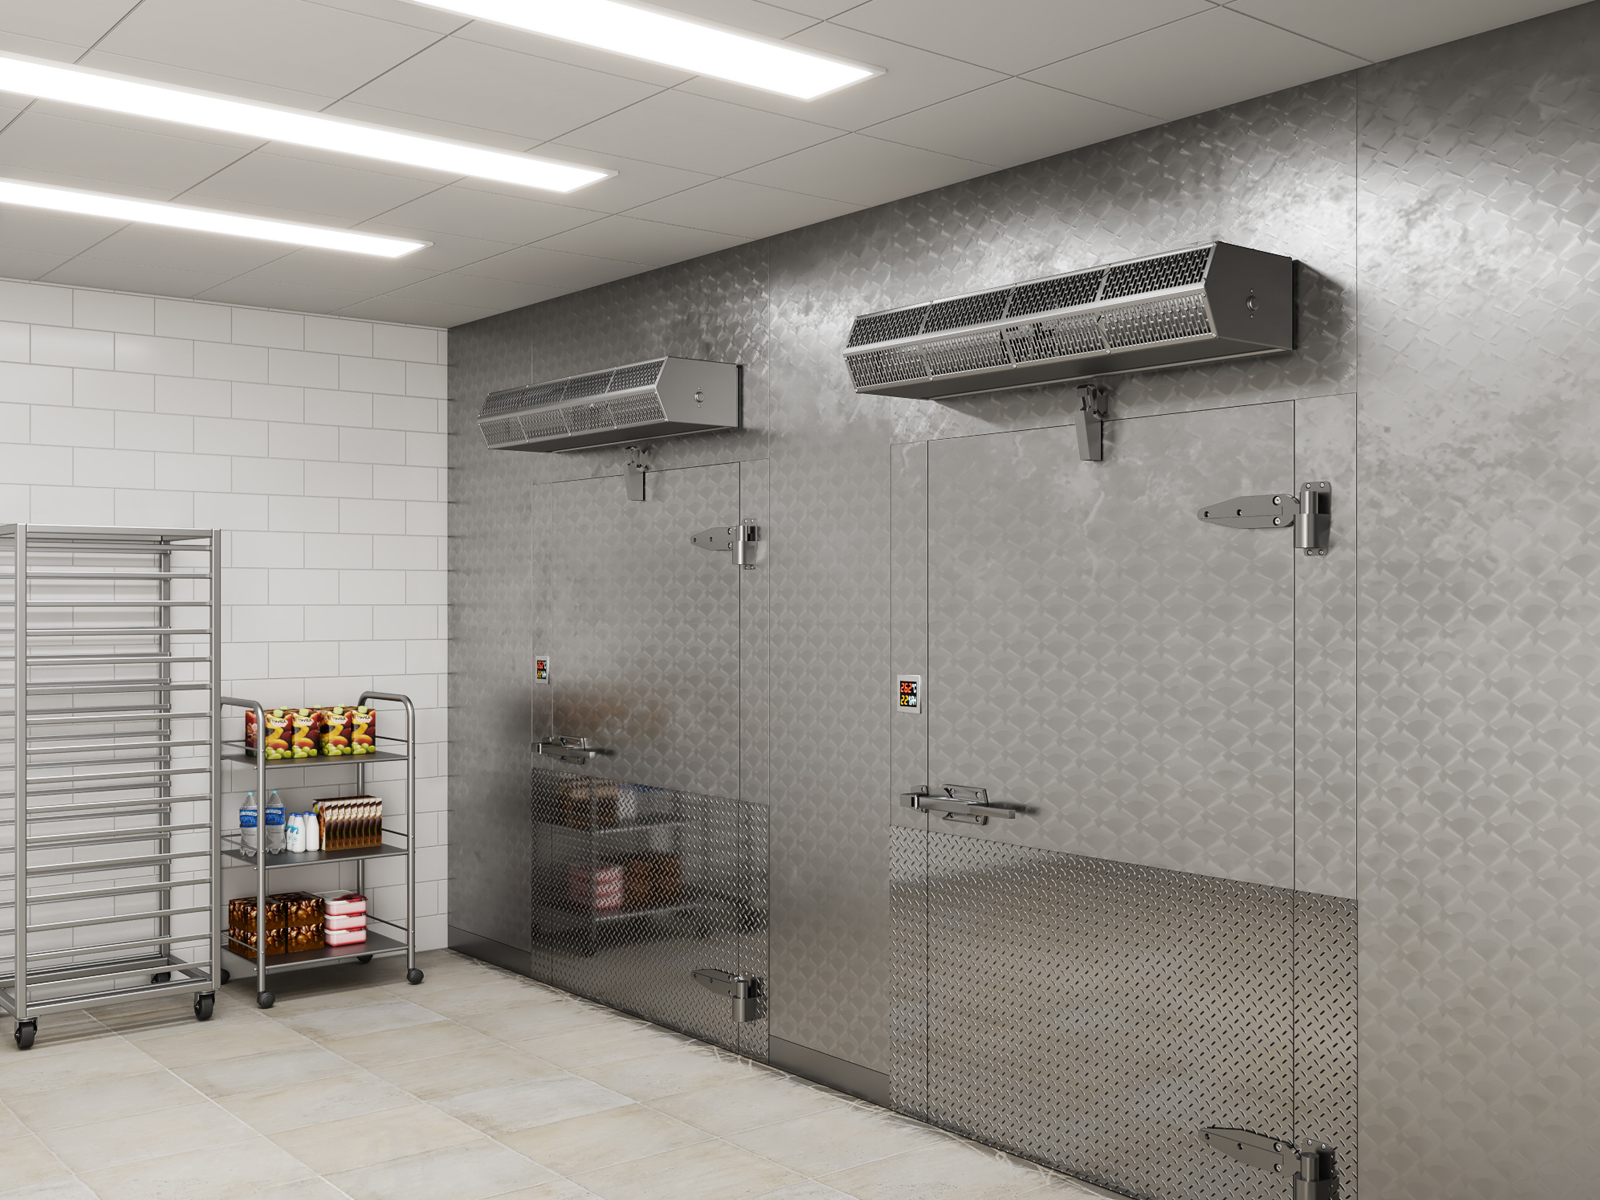 Berner's Commercial Low Profile 8 air curtain over a walk-in cooler.